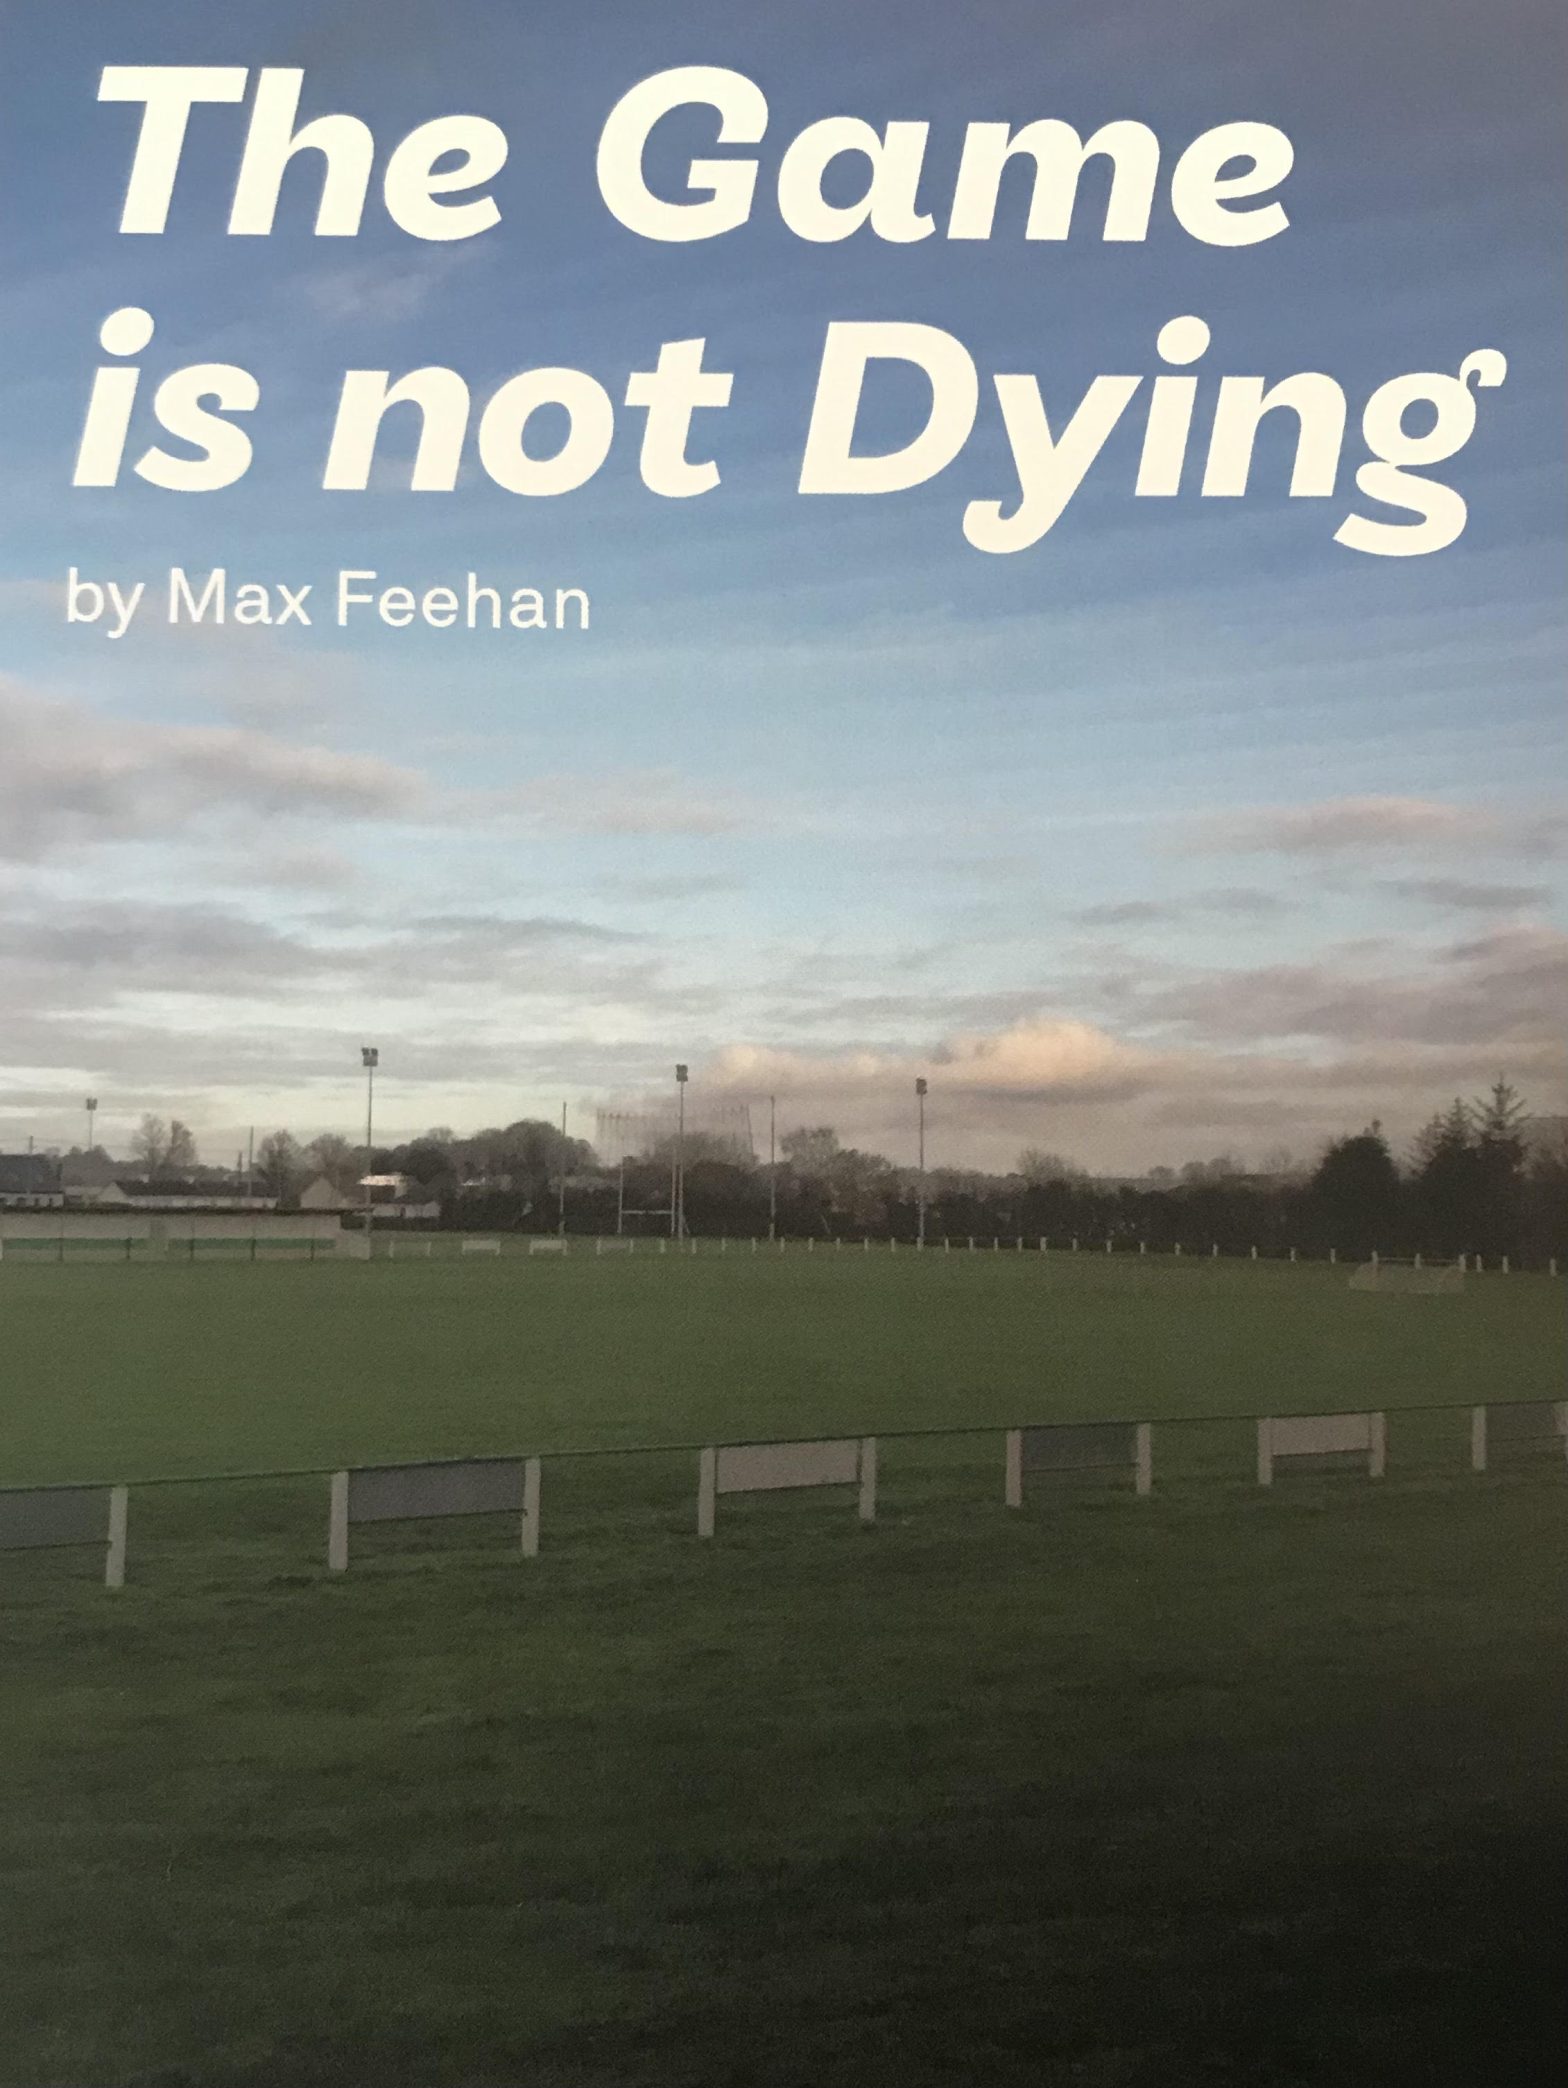 The Game is not Dying Max Feehan